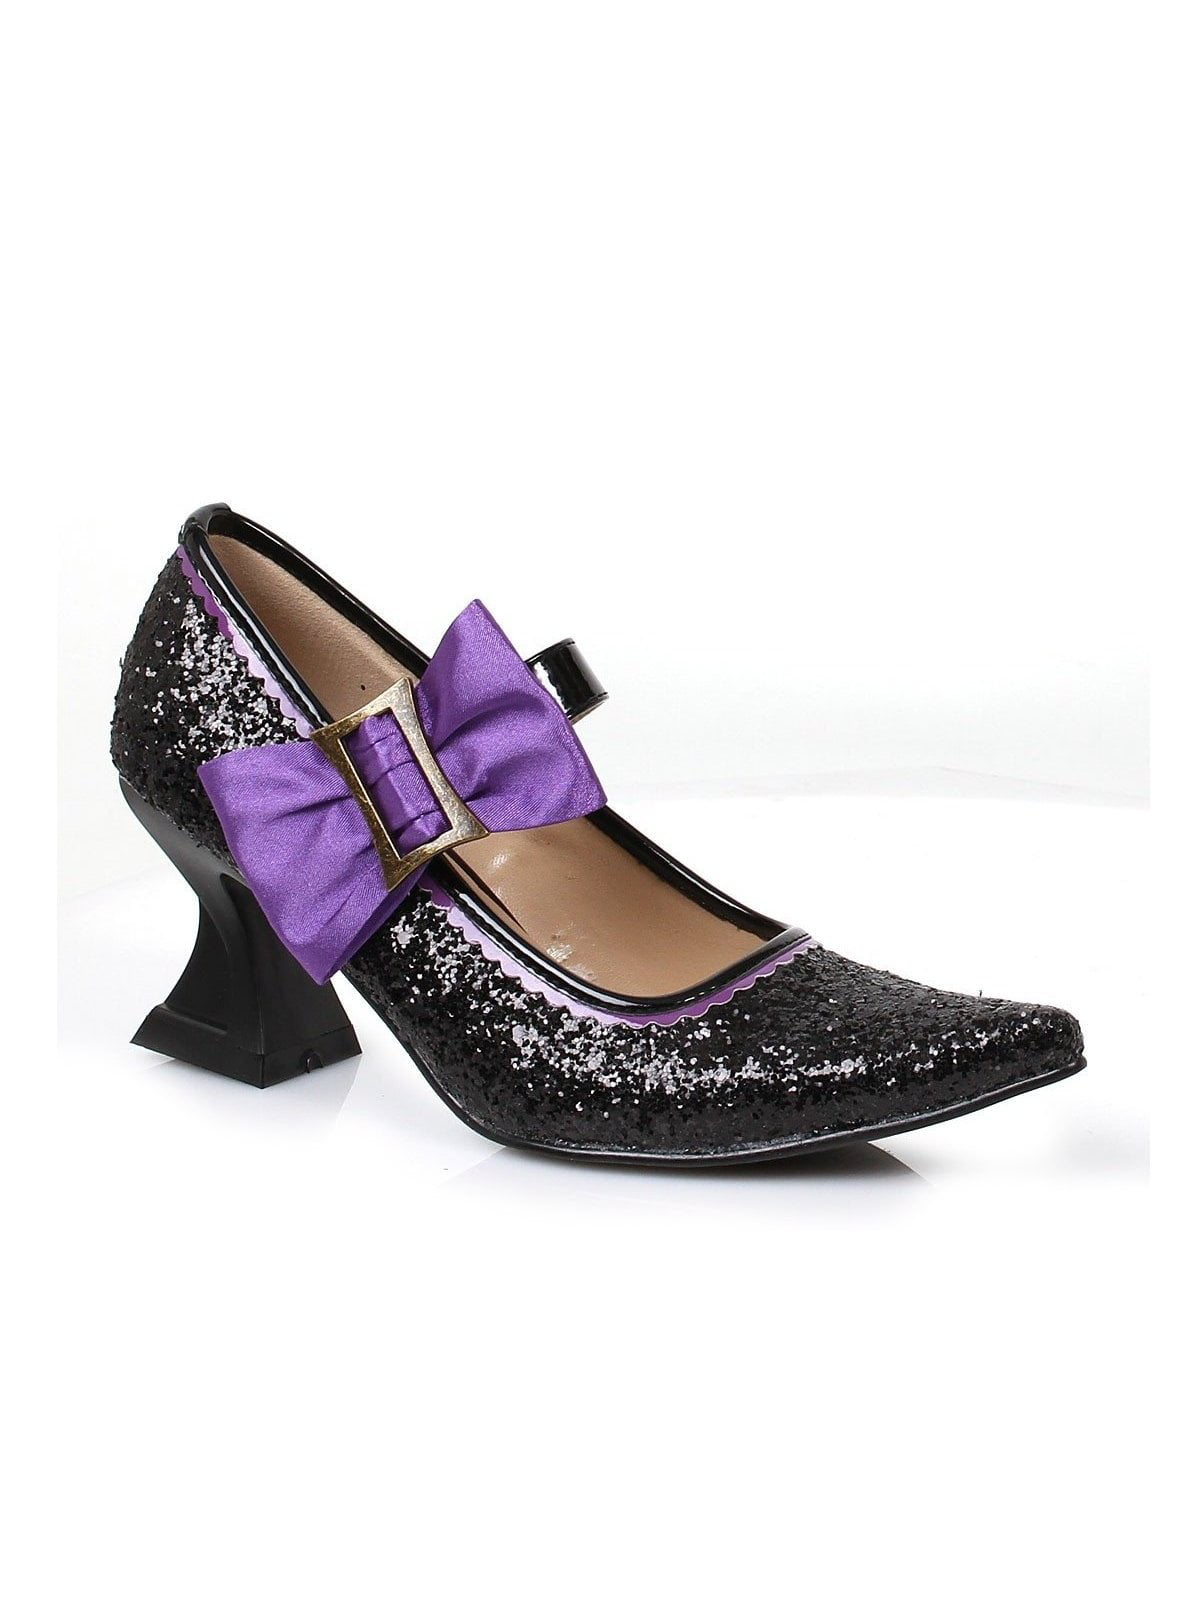 Canvas lace ups for ballroom Halloween Witch Shoes perfect for both!! 4.5-5 